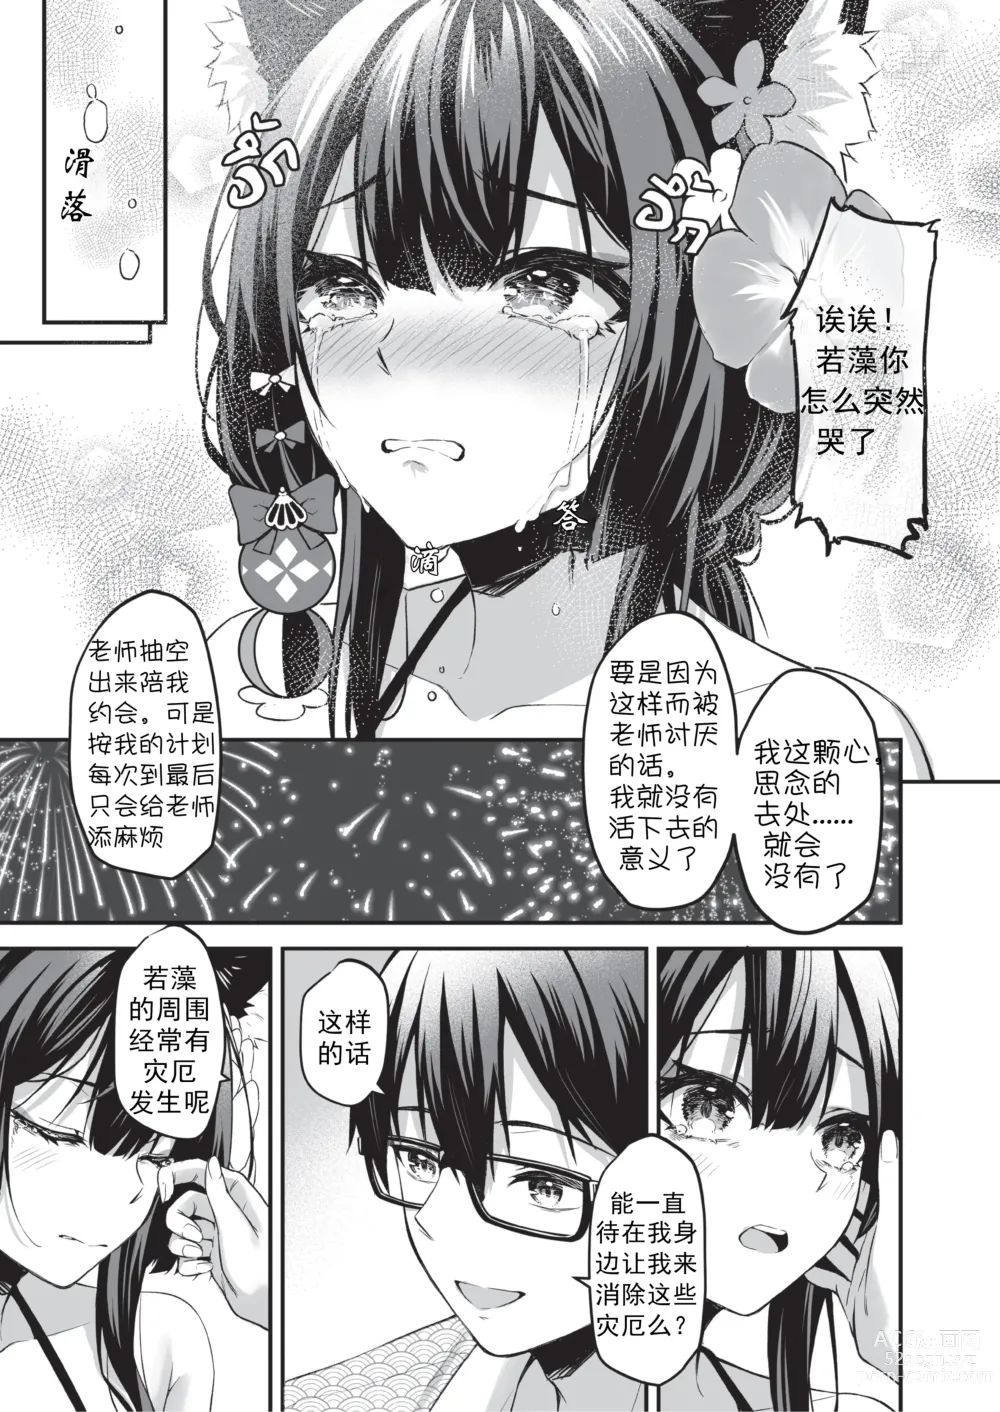 Page 12 of doujinshi OverLove From Wakamo Vol.2 (decensored)